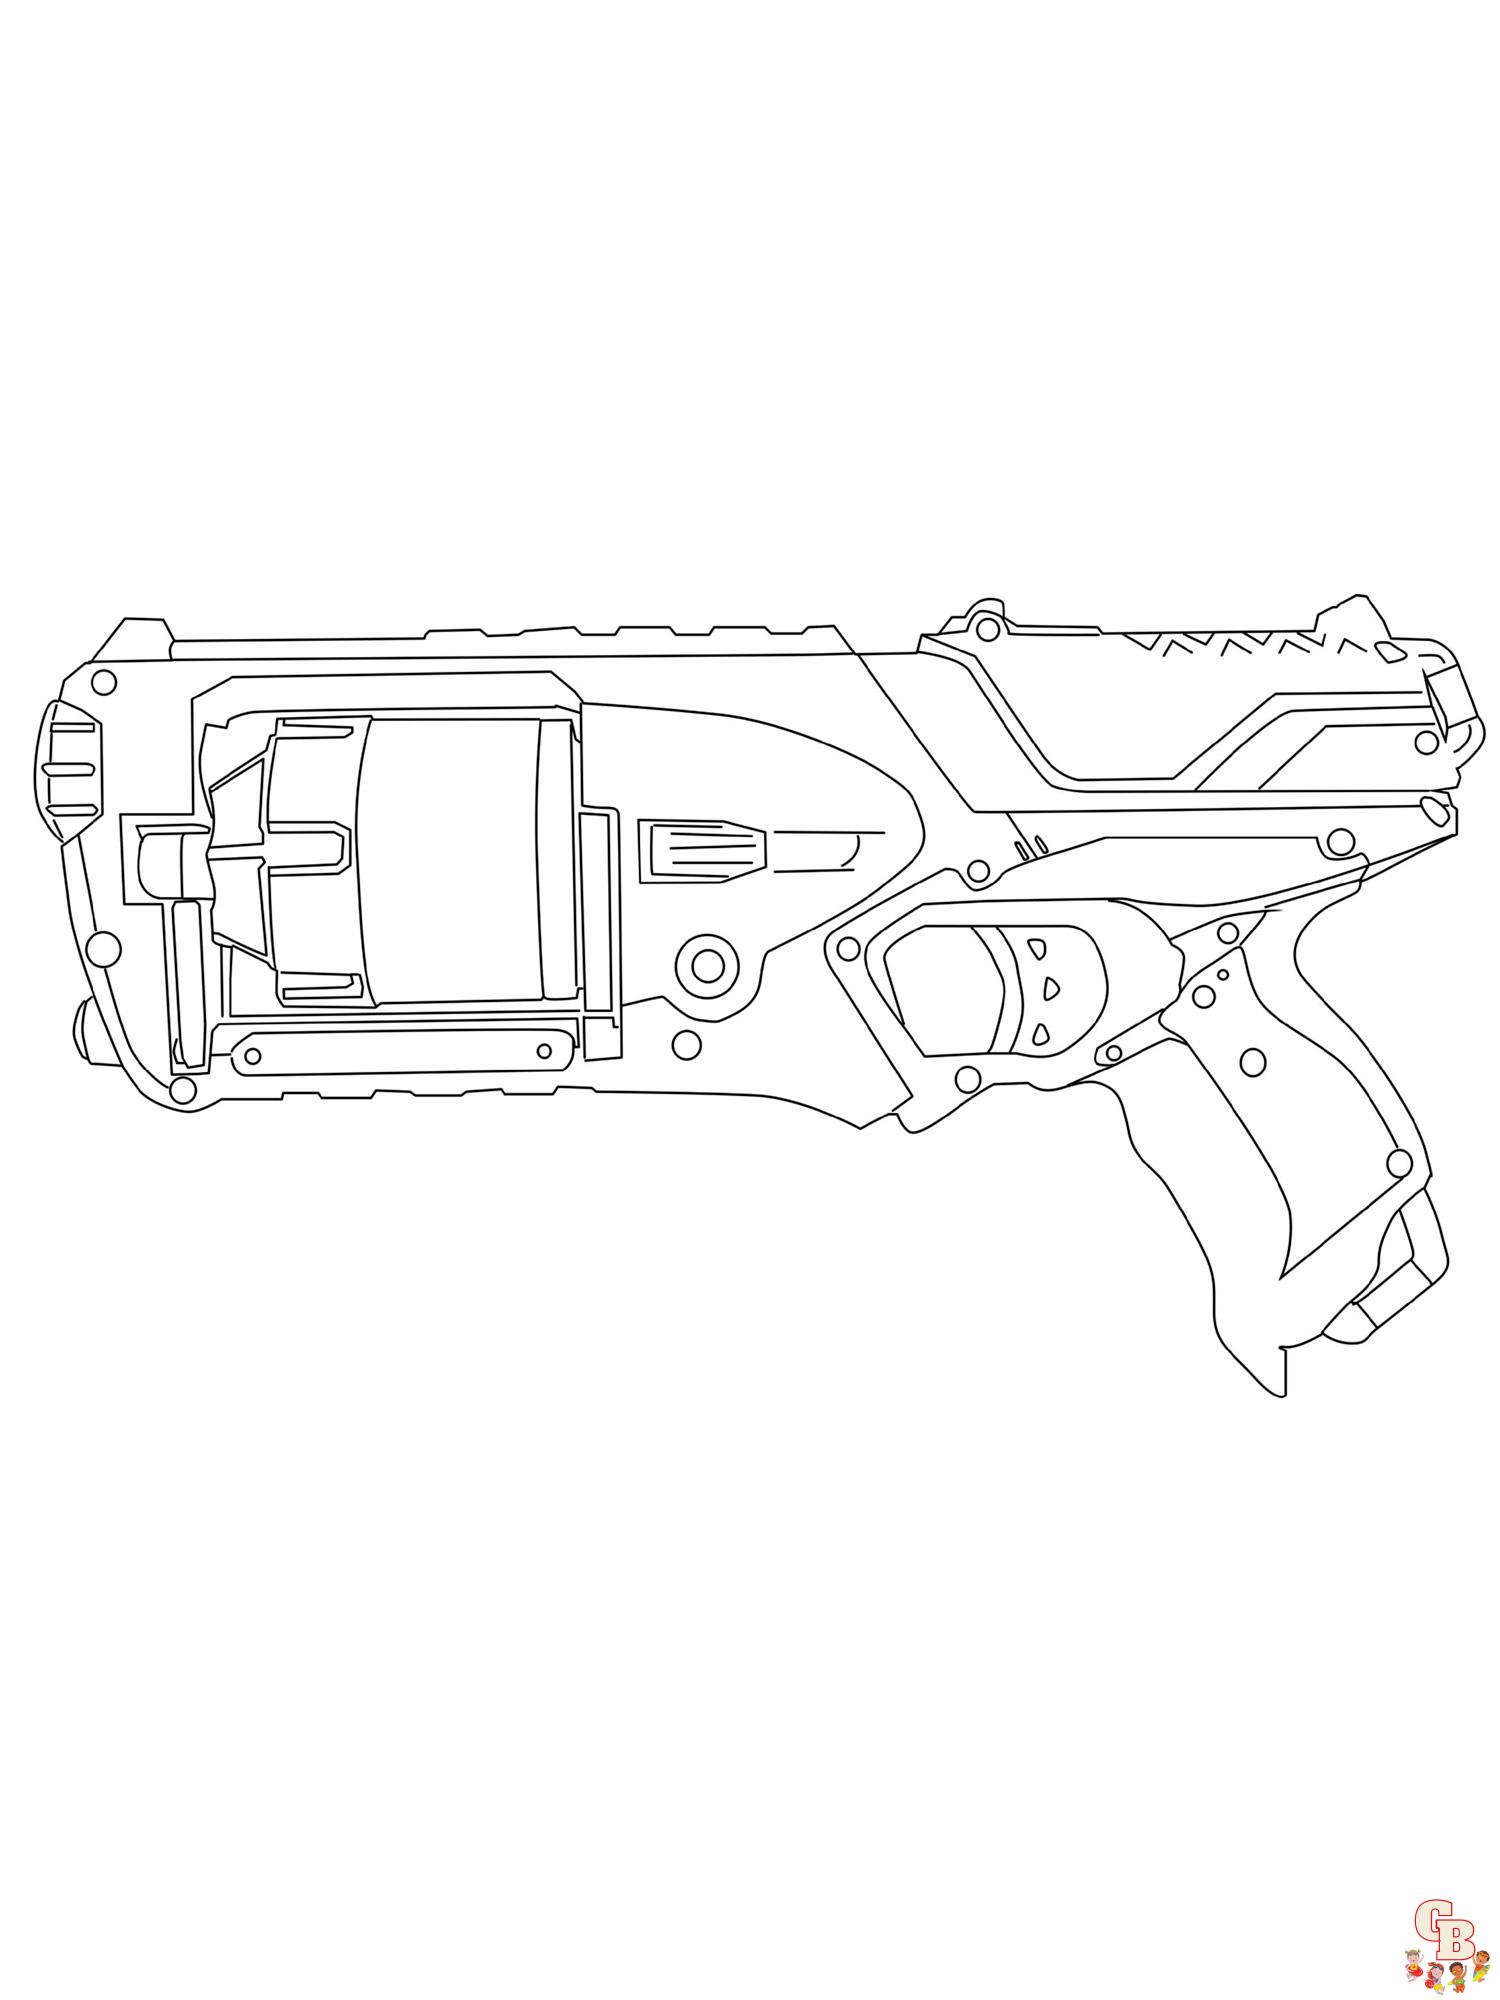 Nerf Coloring Page - Super Fun Coloring